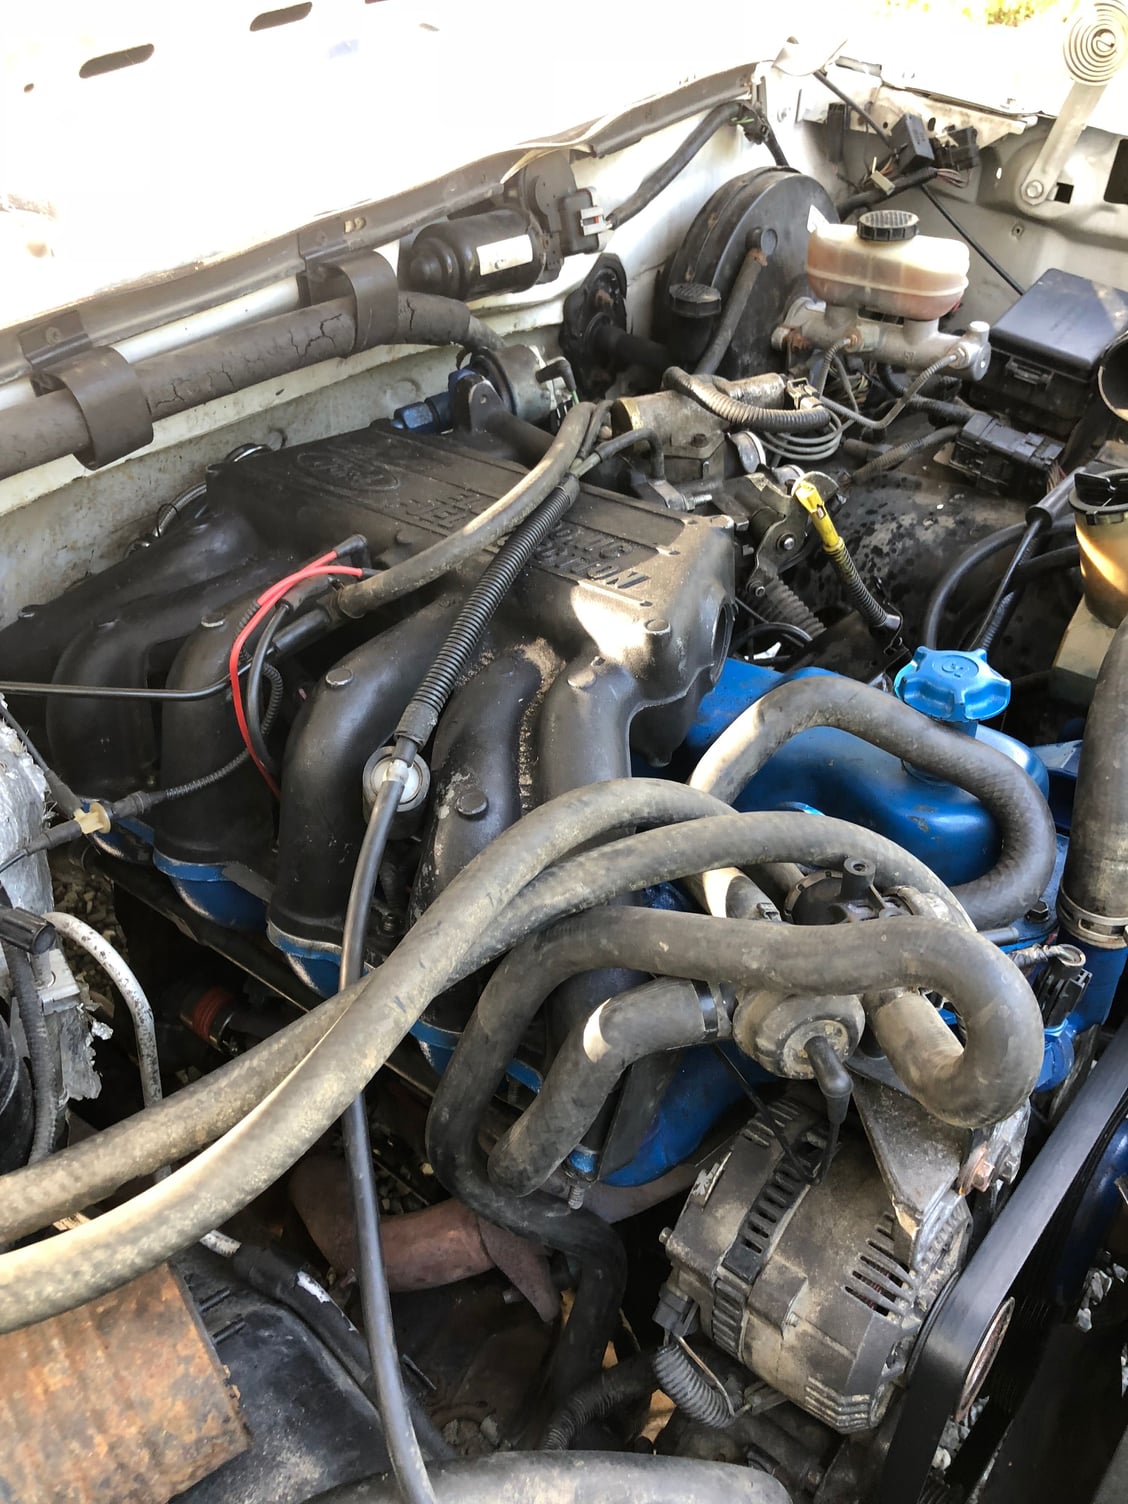 1995 Ford f 150 300 straight 6 Vacuum and egr issues - Ford F150 Forum